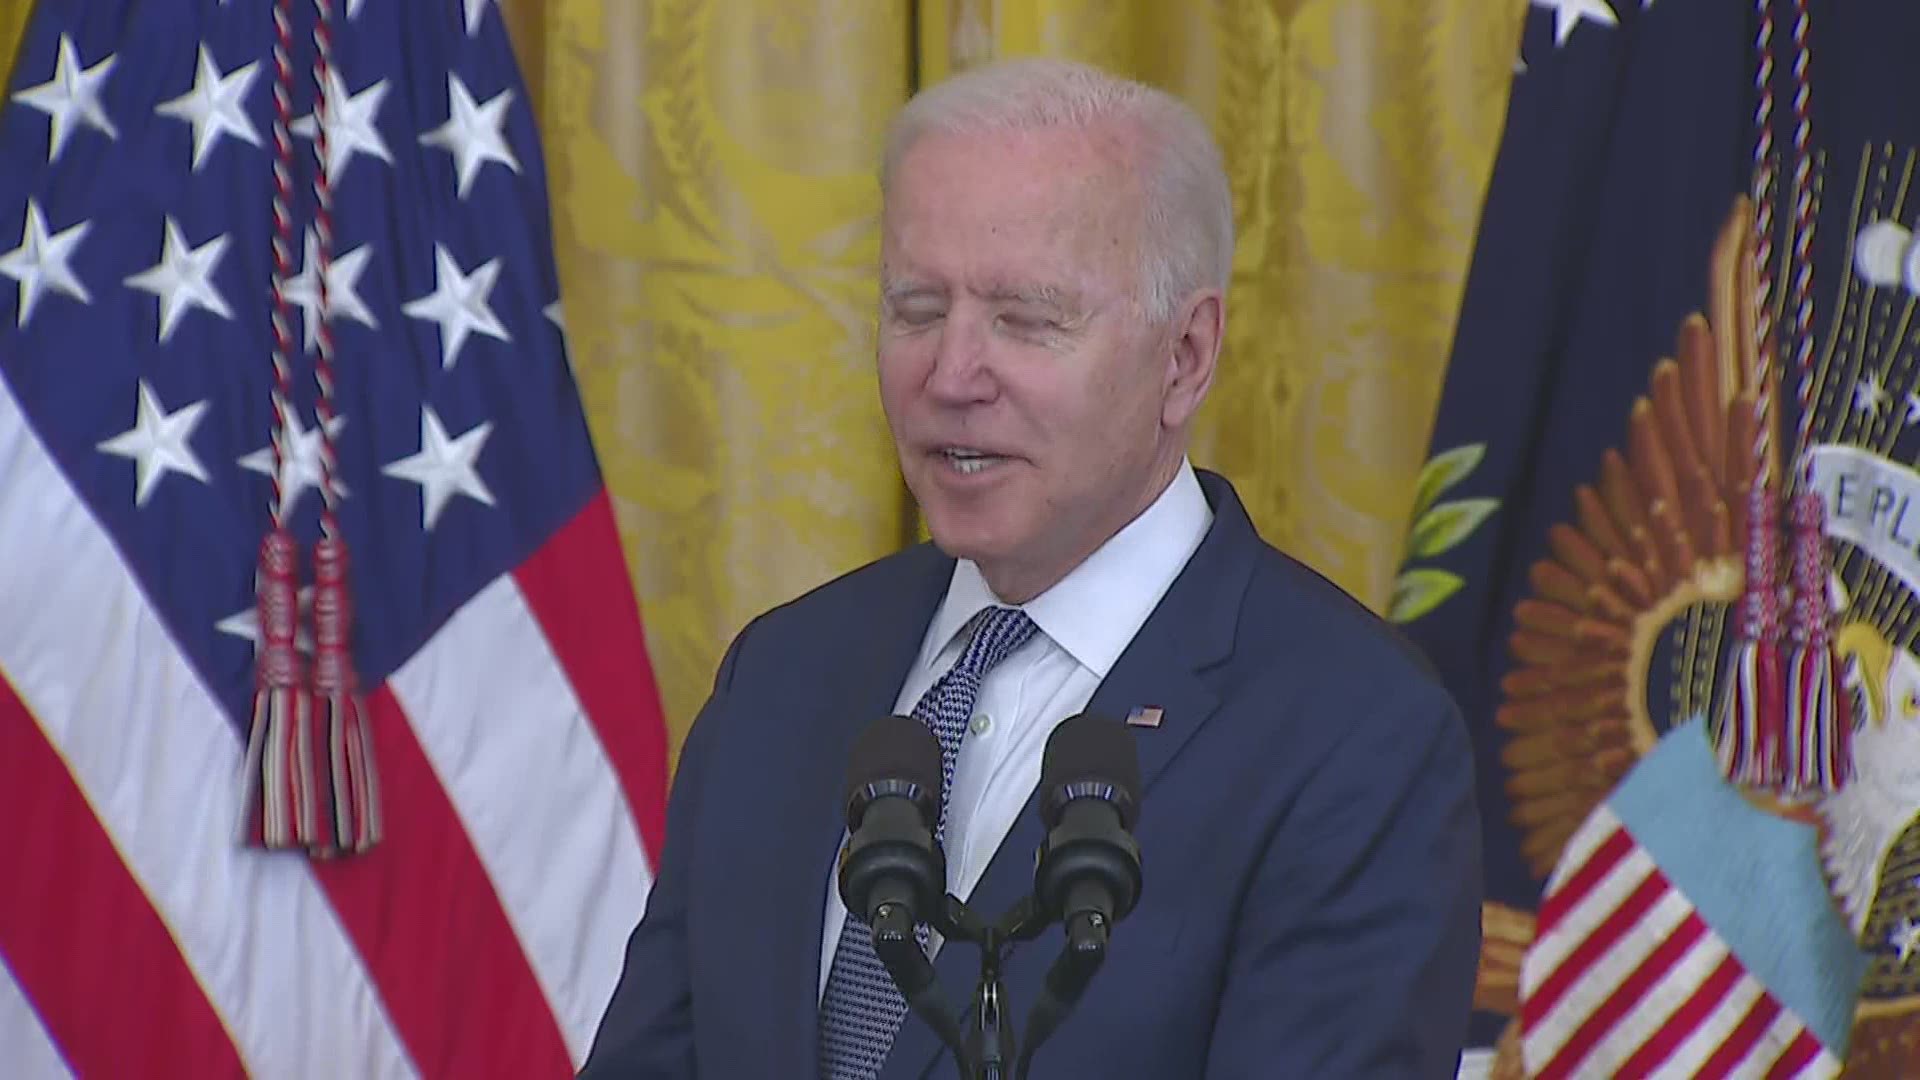 US President Biden called Thursday a, "really, really really important moment in our history." Thursday Biden signed a bill making Juneteenth a national holiday.